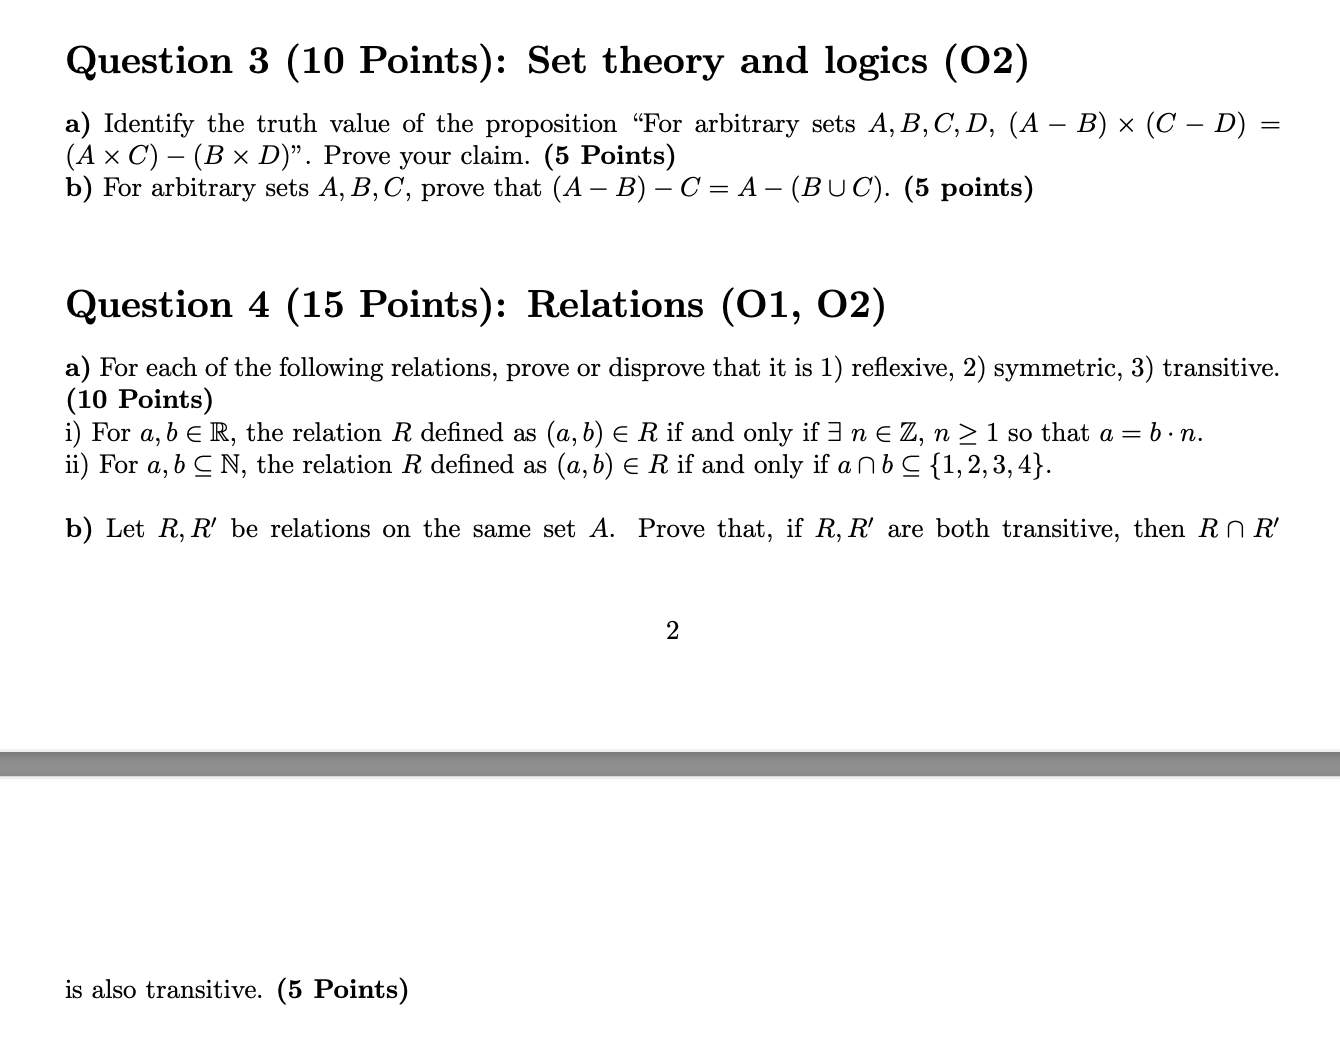 Question 3 (10 Points): Set theory and logics (02) - a) Identify the truth value of the proposition "For